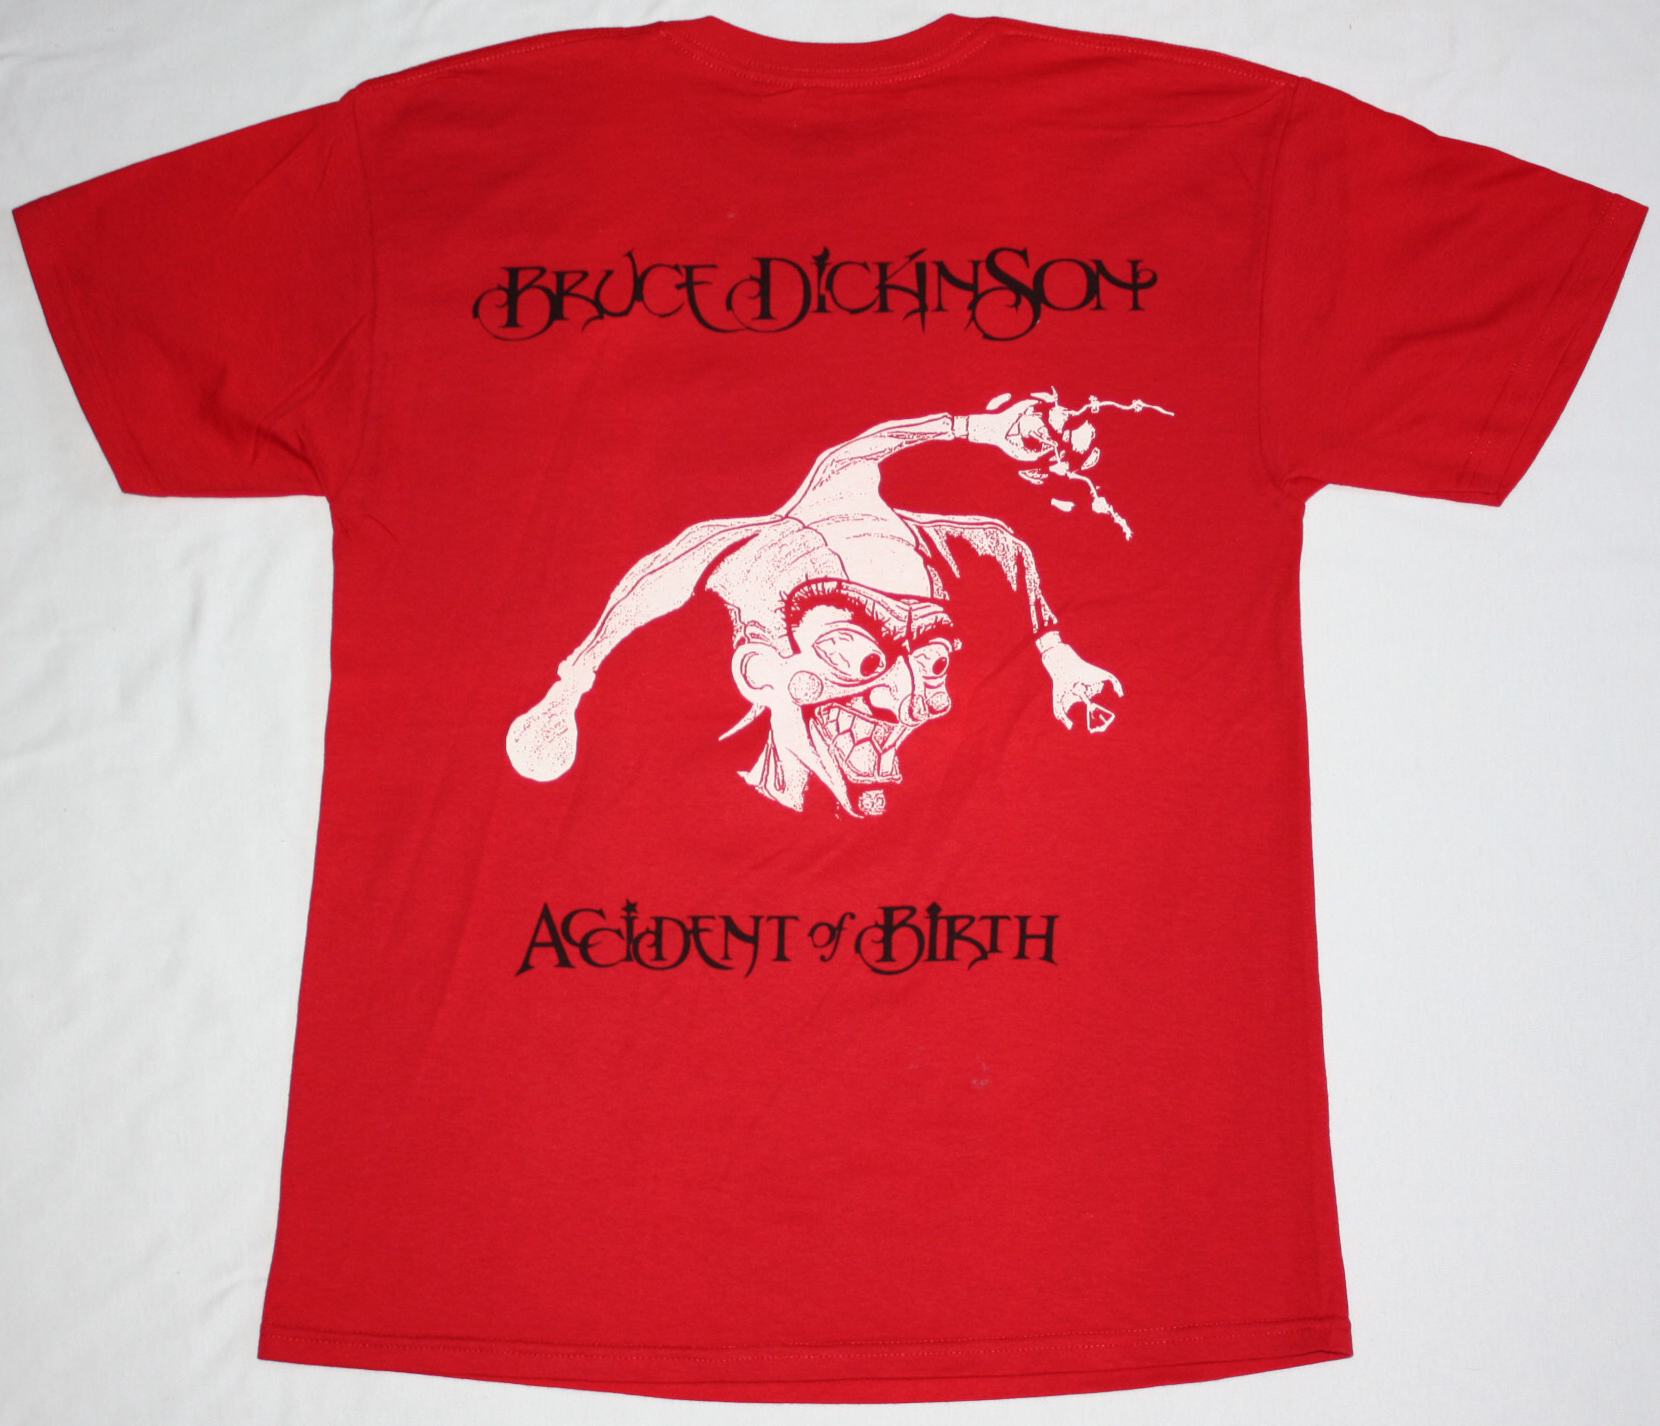 BRUCE DICKINSON  ACCIDENT AT BIRTH'97 NEW RED T-SHIRT